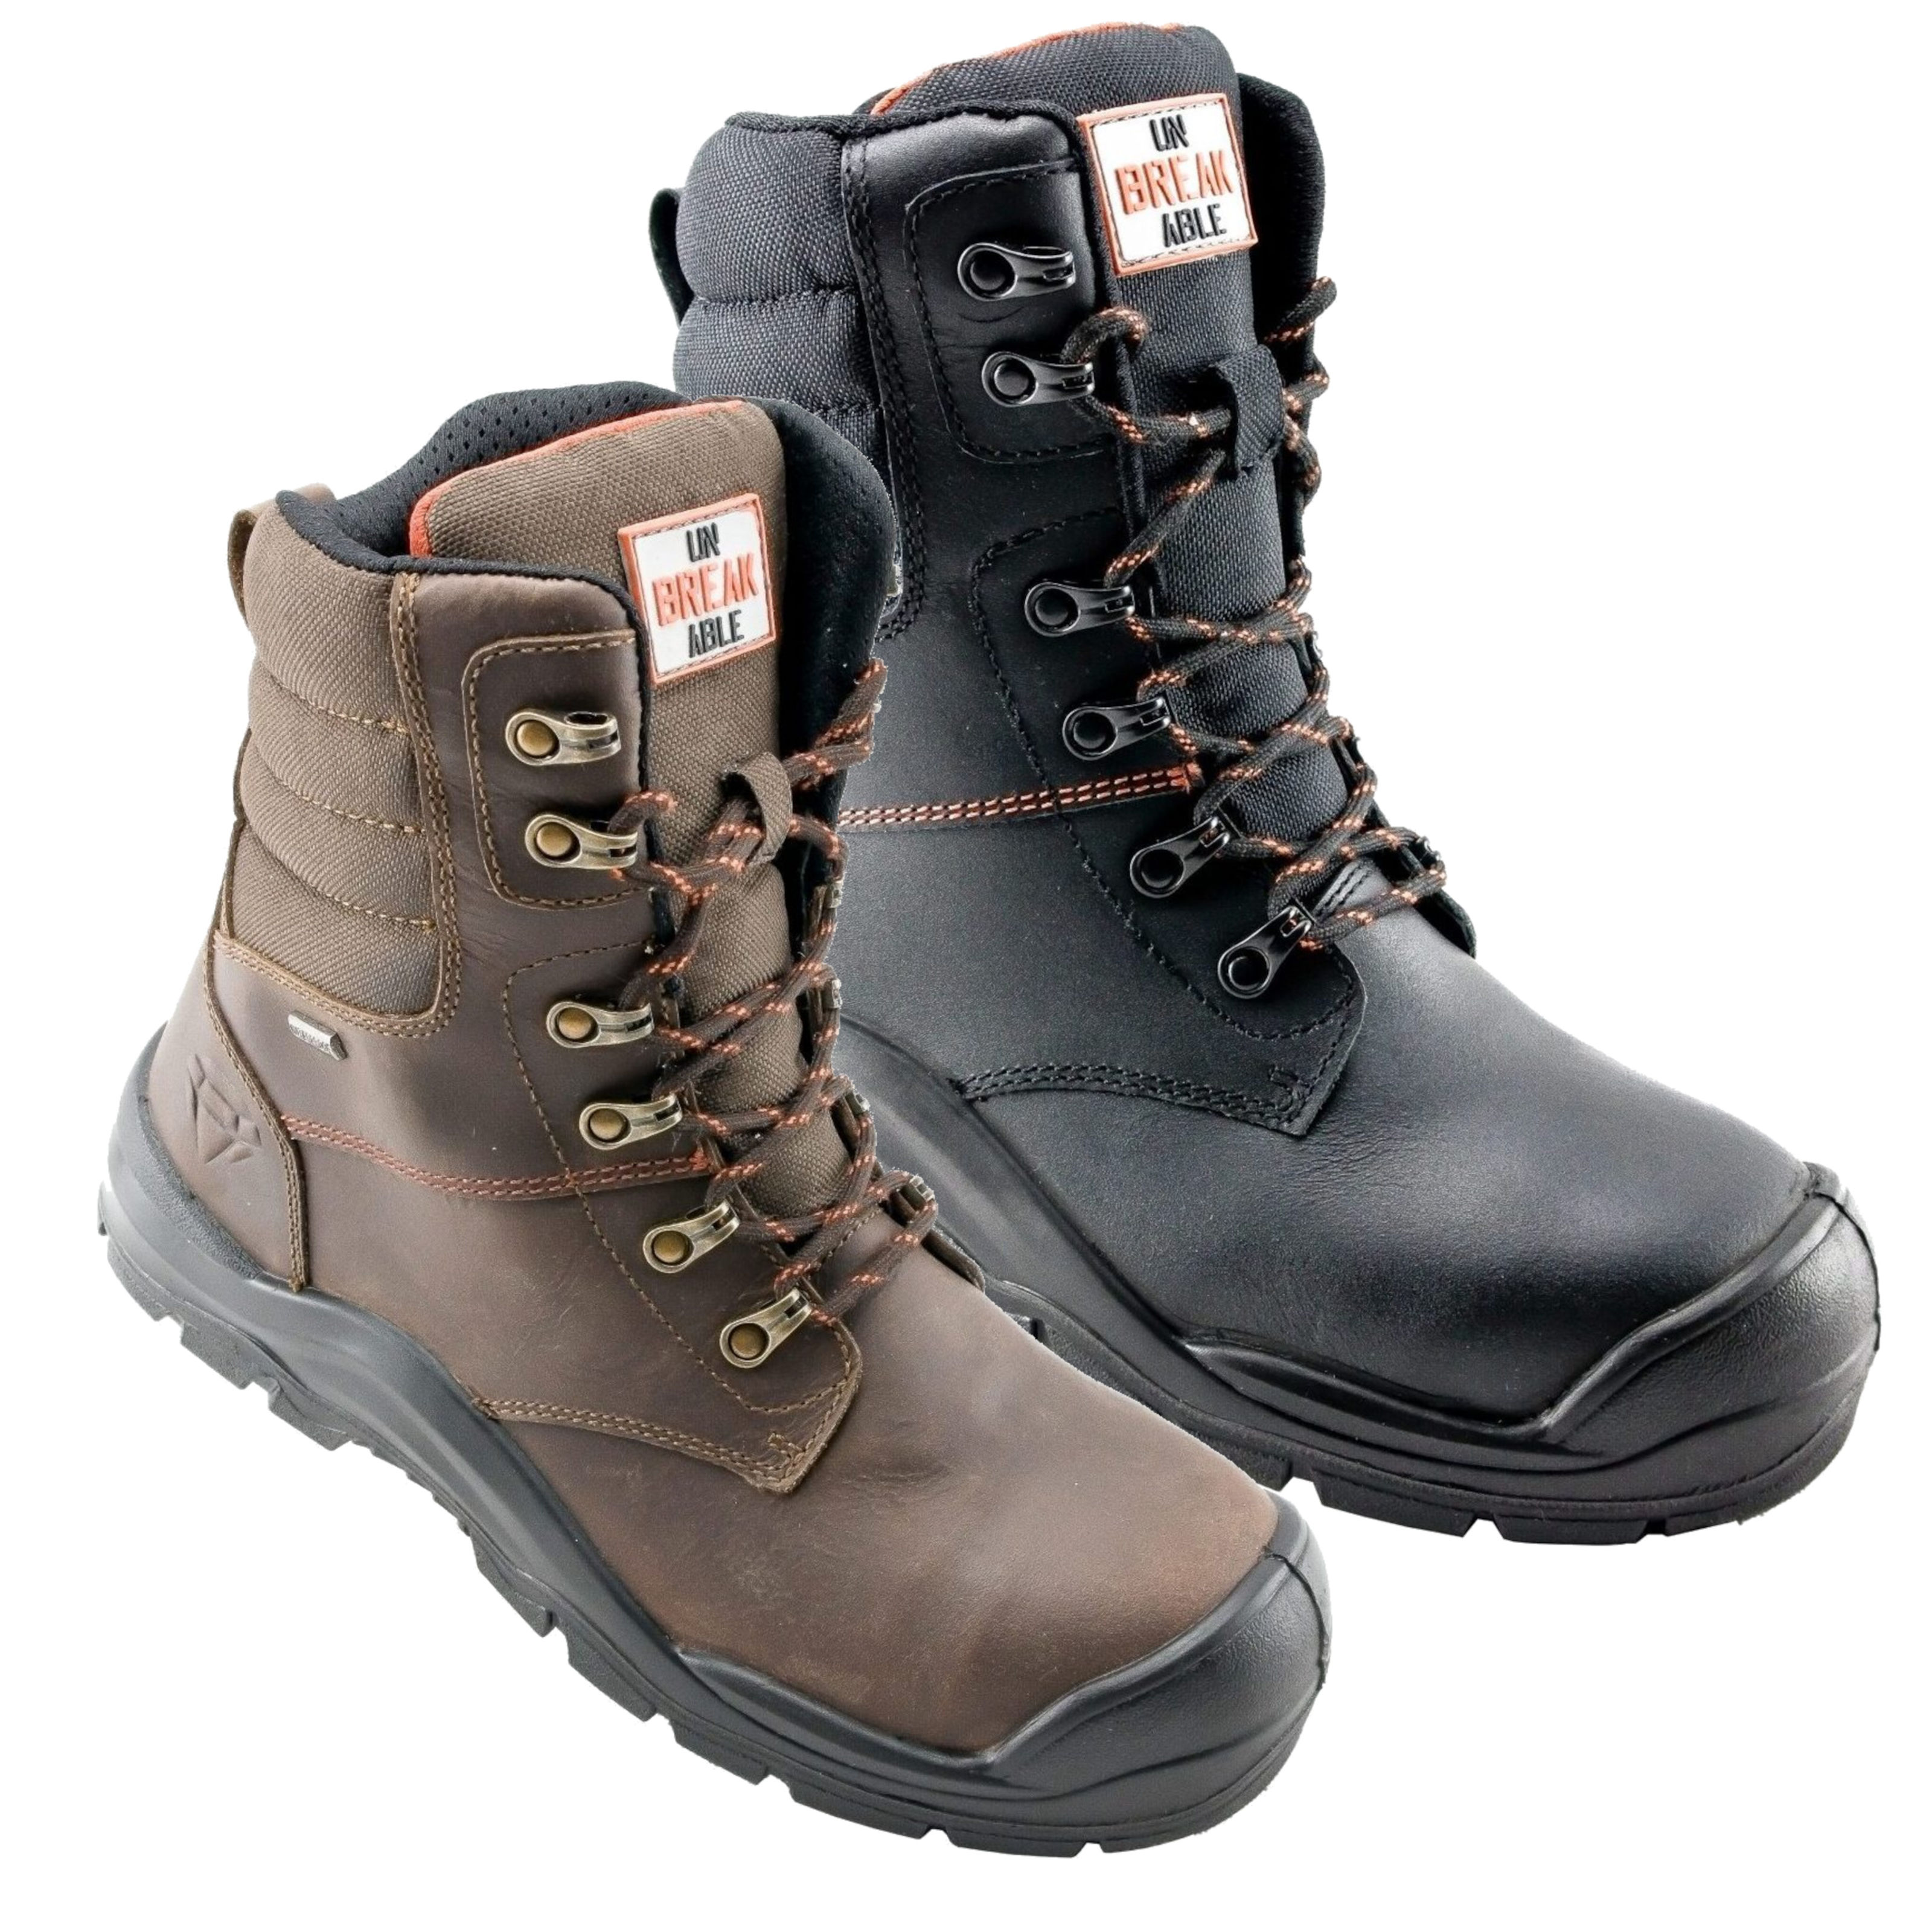 TUFFKING S3 SAFETY BROWN LEATHER BOOTS STEEL TOE MIDSOLE S3 SIZE 3-13 